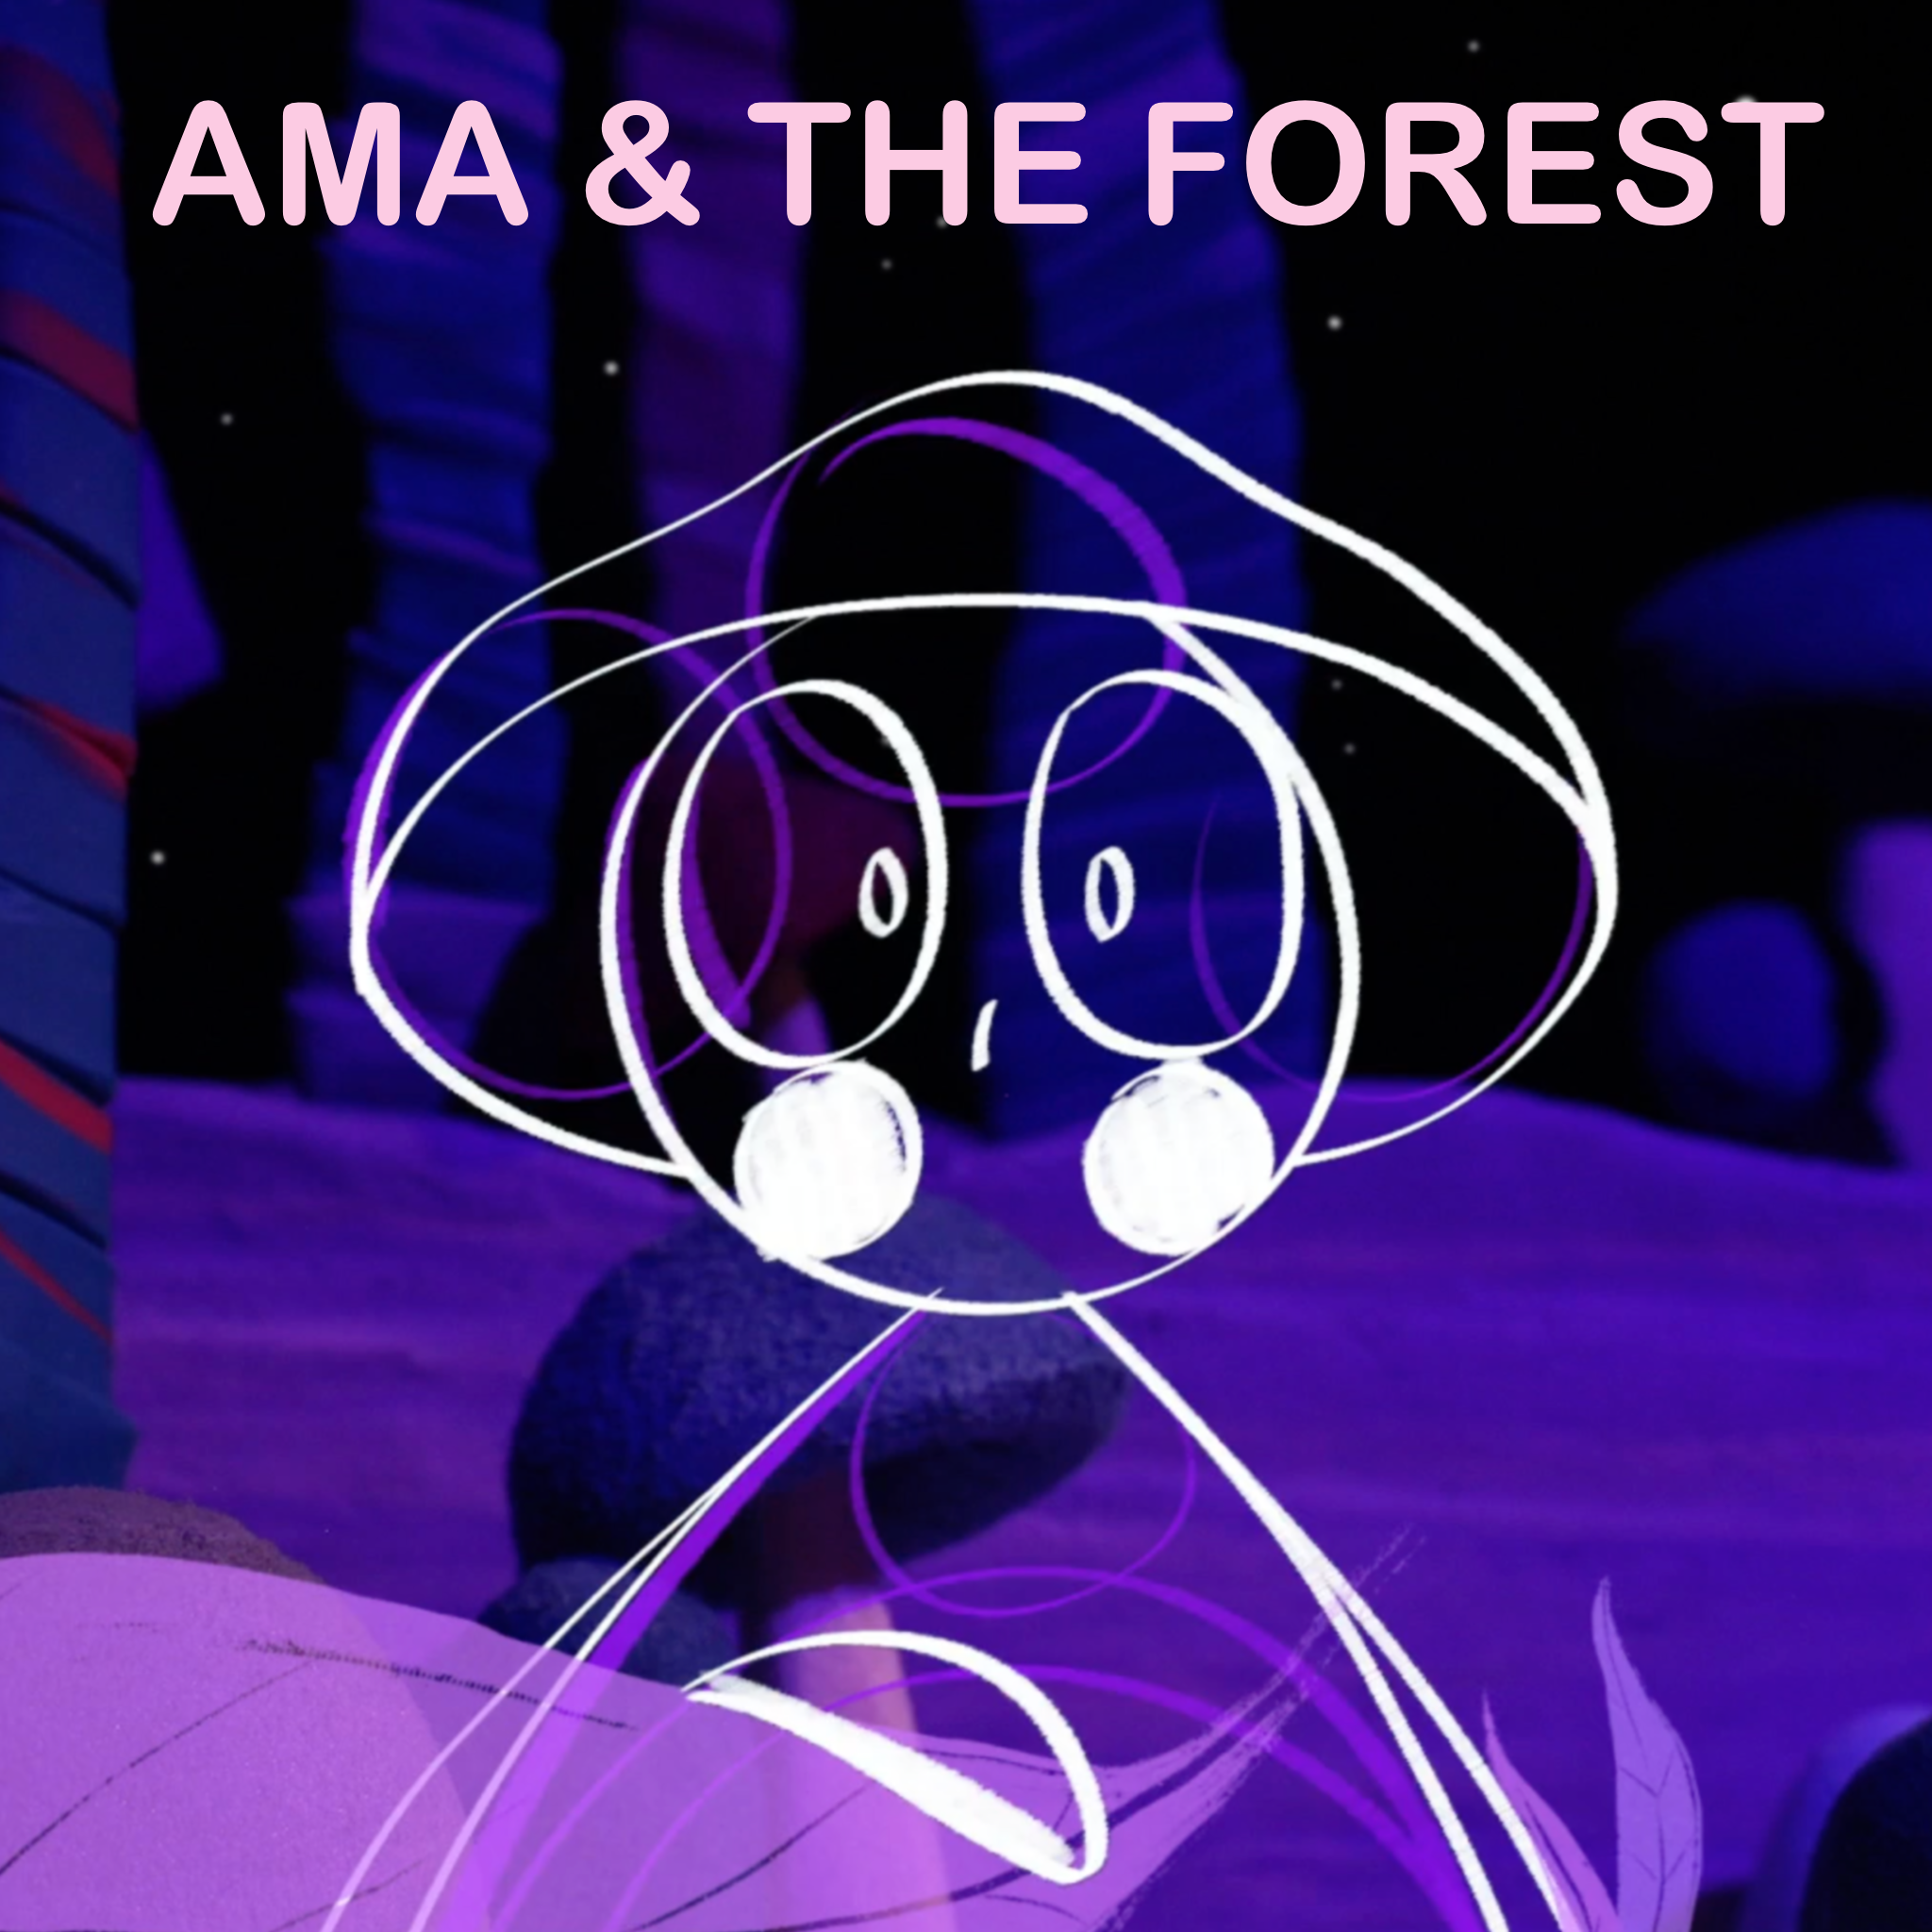 AMA & THE FOREST